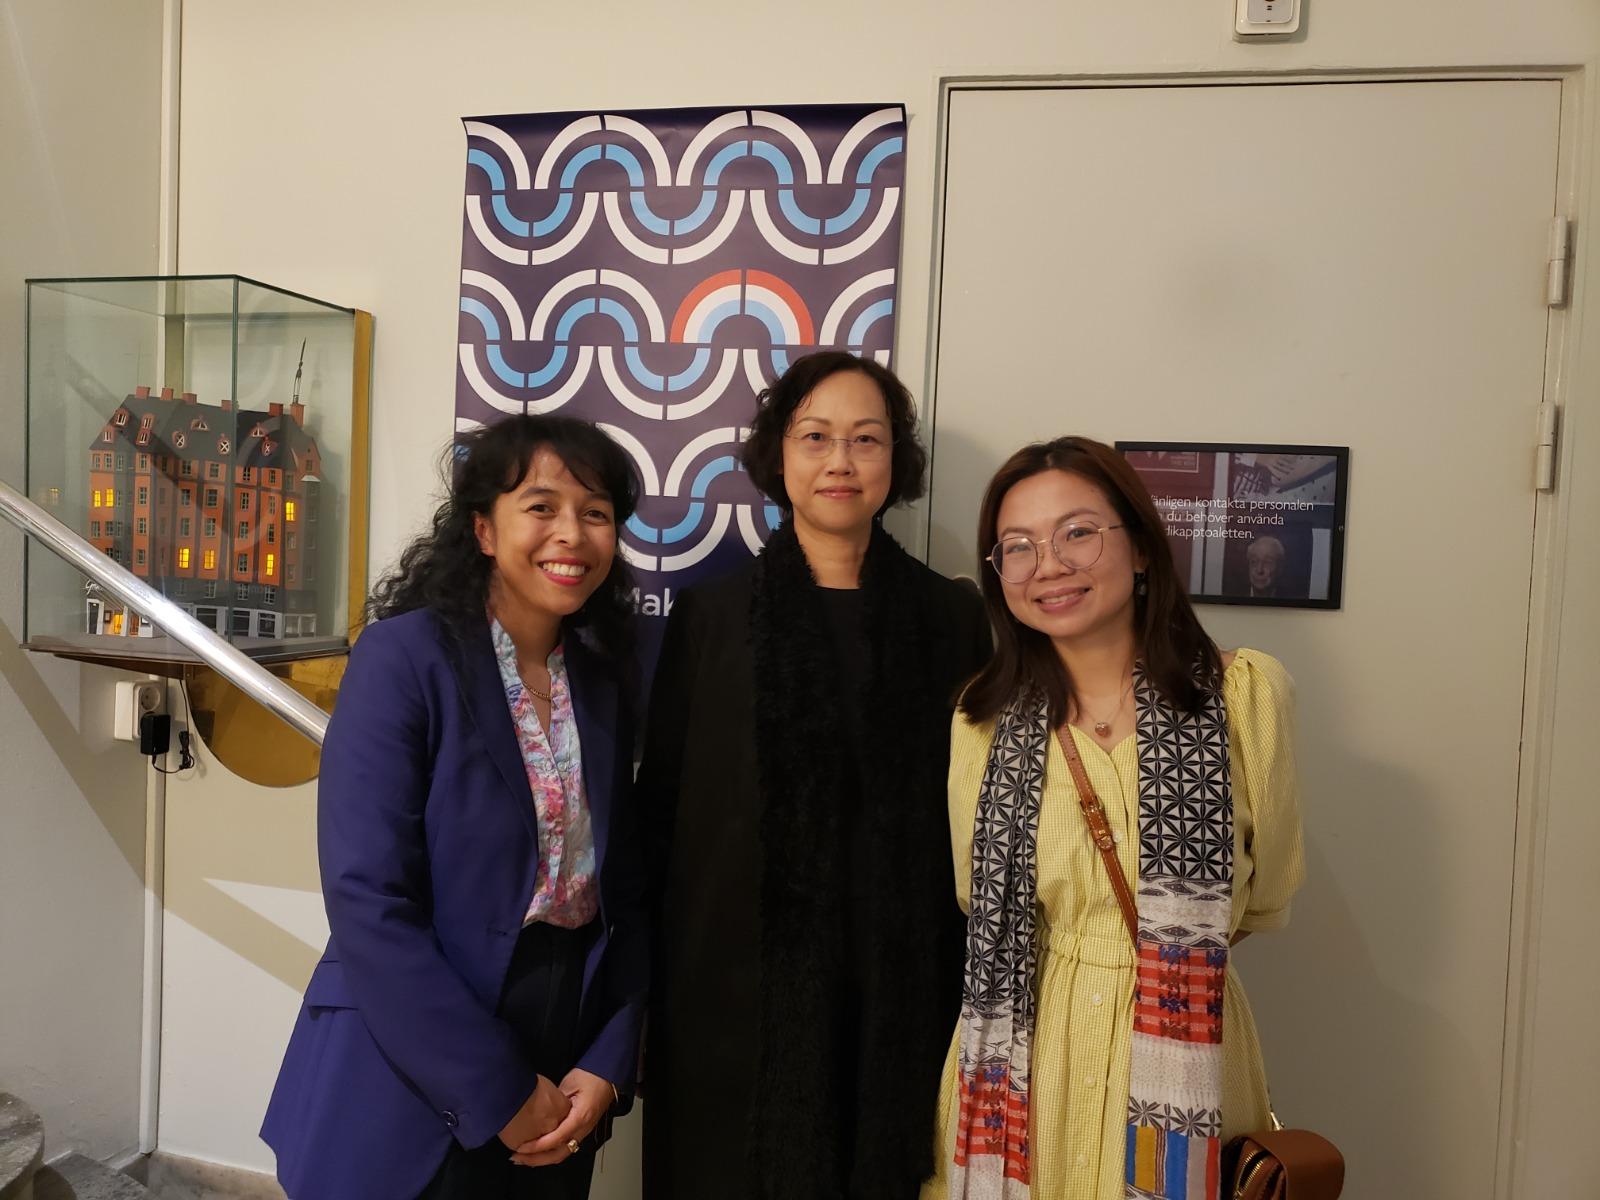 With the support of the Hong Kong Economic and Trade Office, London, the "Making Waves - Navigators of Hong Kong Cinema" programme was held from September 22 to 24 (Stockholm time) in Stockholm, Sweden. Photo shows (from left) the Head of Program of Asiatiska Filmfestivalen, Ms Maria Razakamboly; the Finance and Operations Director of the Hong Kong International Film Festival Society, Ms Jannie Ma; and the director of "A Light Never Goes Out", Anastasia Tsang.